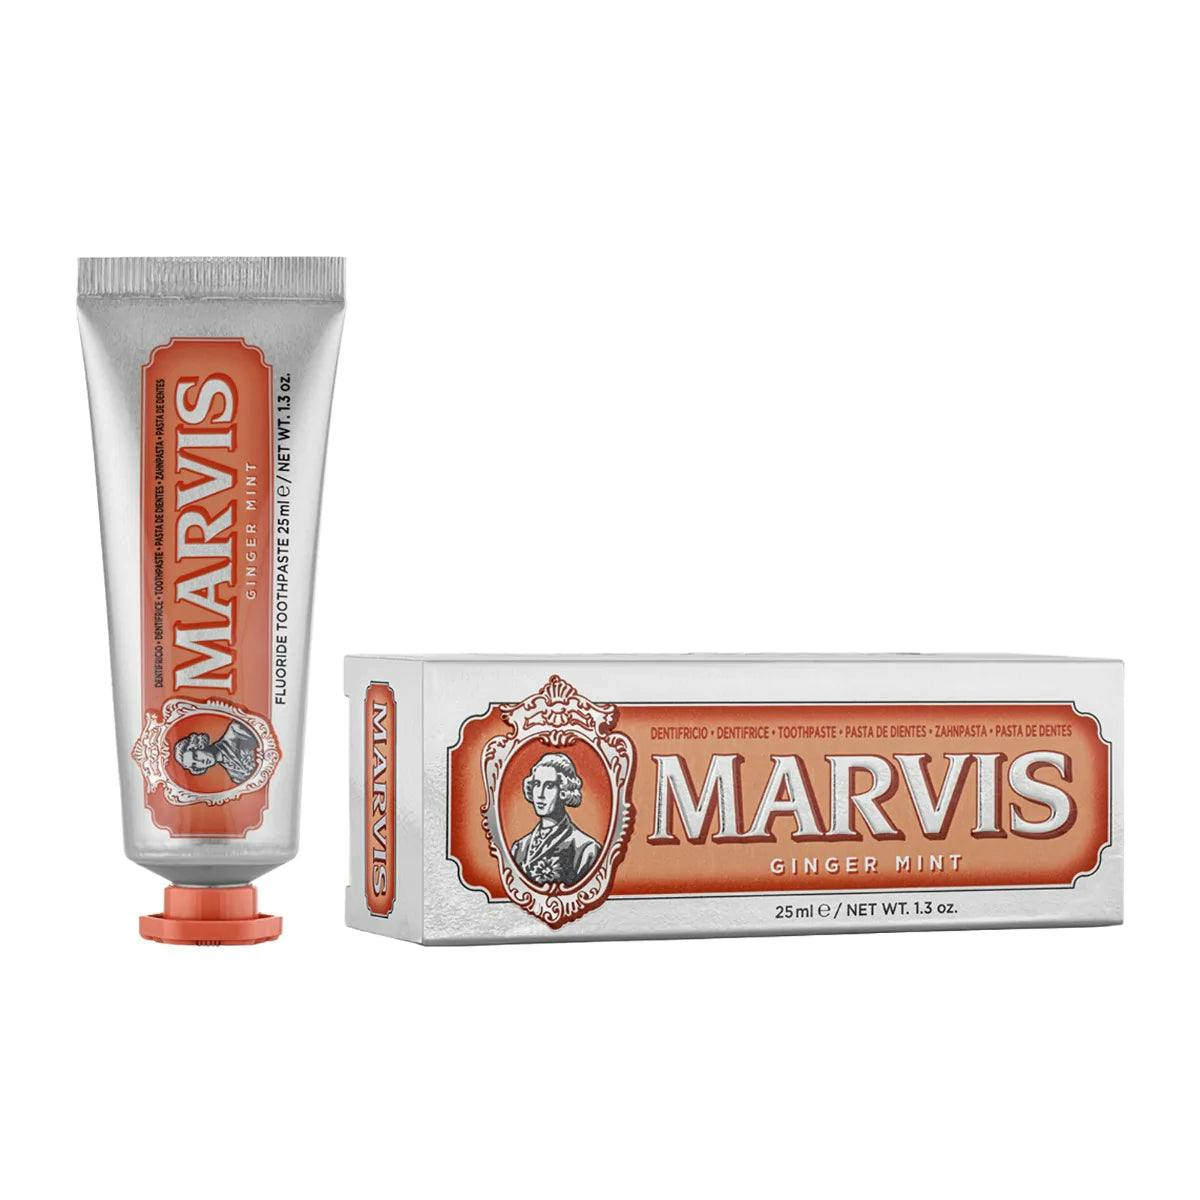 Marvis Travel Size Ginger Mint Toothpaste 25ml